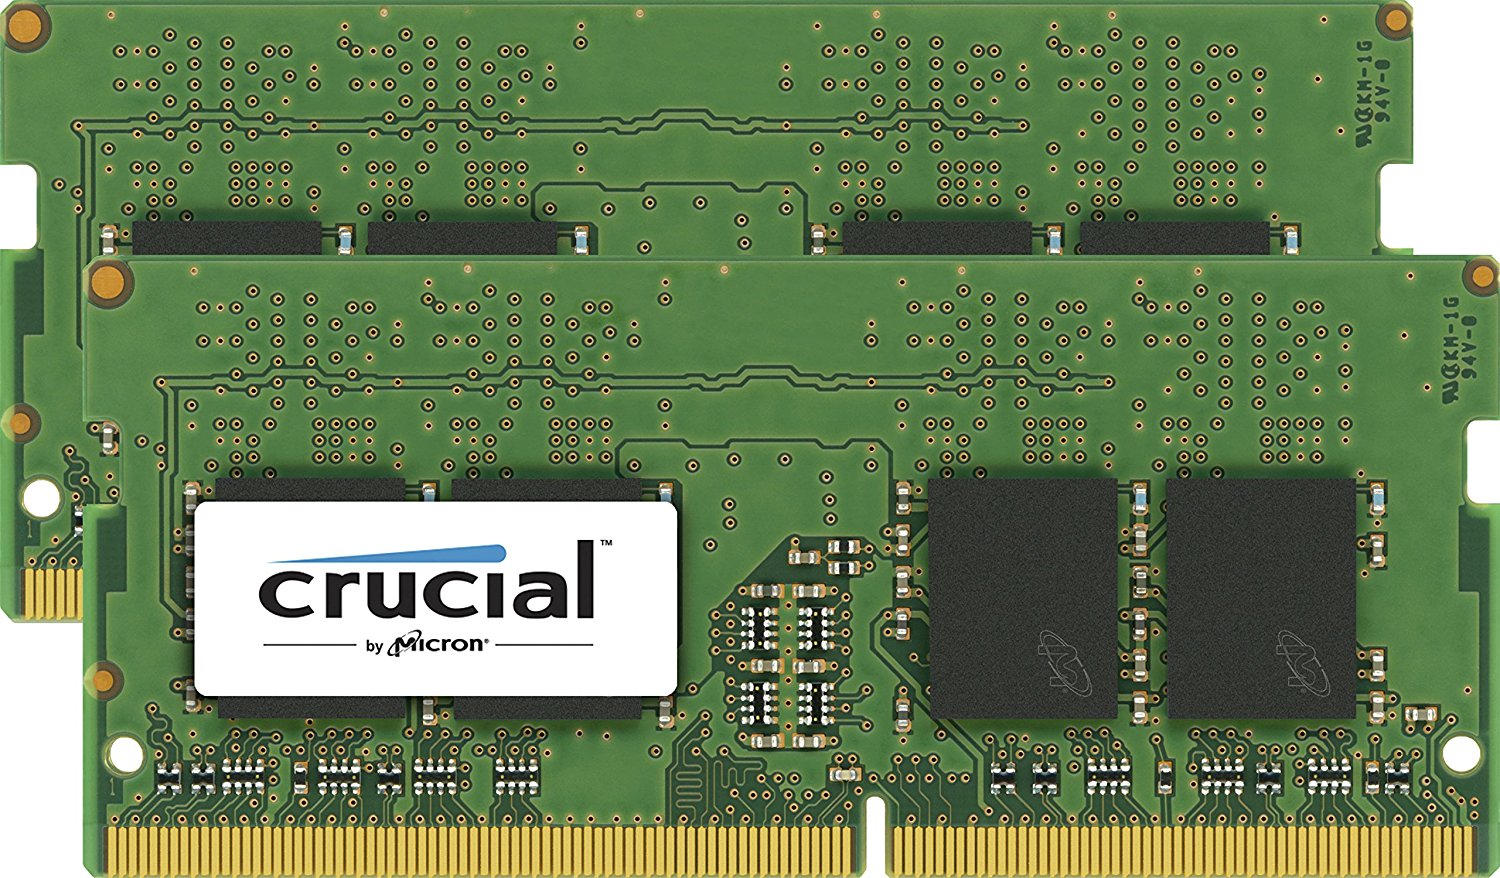 Crucial 32GB Kit (16GBx2) DDR4 2400 MT/s (PC4-19200) 260-Pin SODIMM Memory - CT2K16G4SFD824A - image 3 of 8